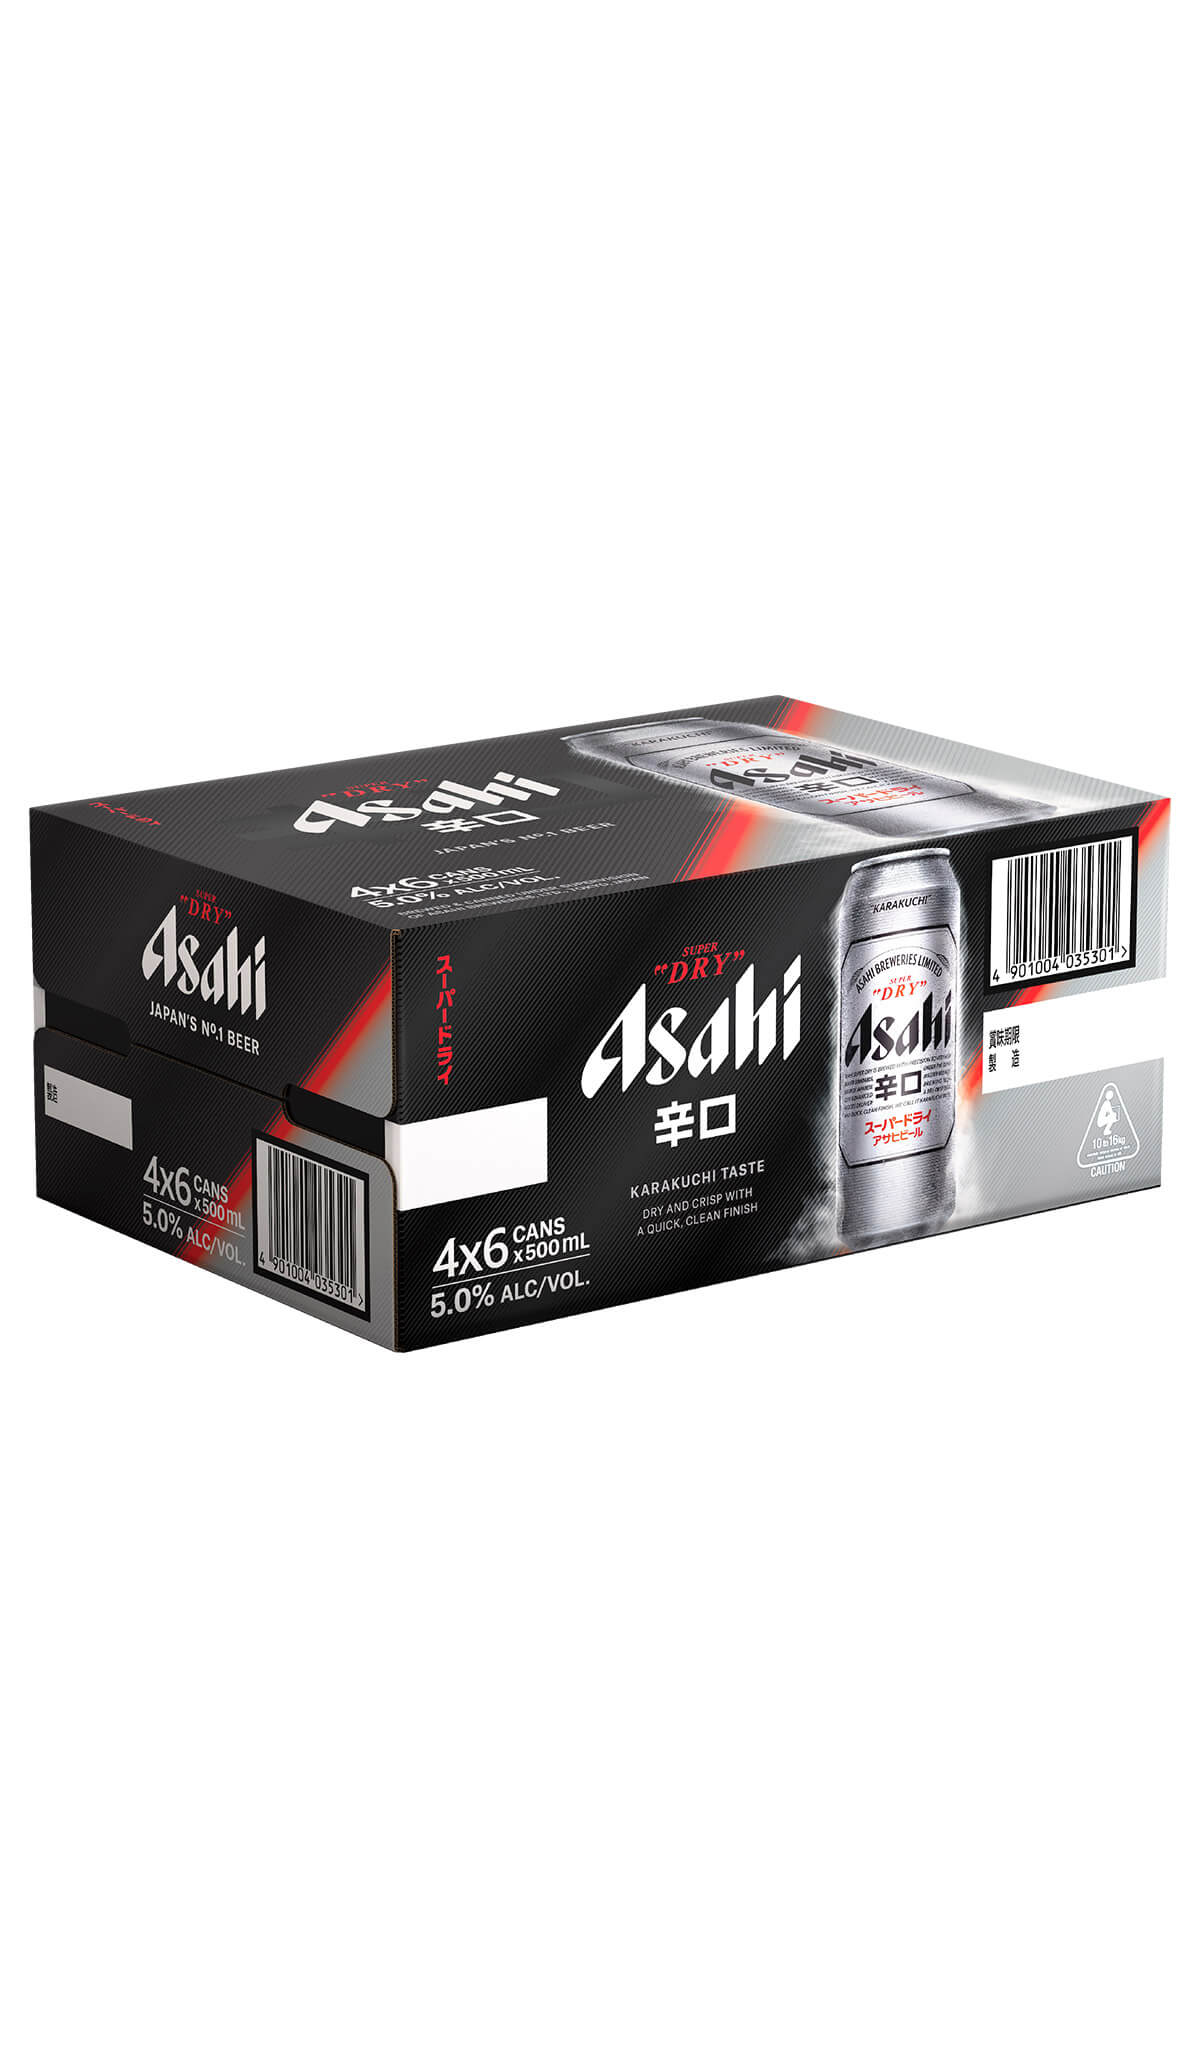 Find out more, explore the range and purchase Asahi Super Dry 24x500ml tubes cans slab online at Wine Sellers Direct - Australia's independent liquor specialists.